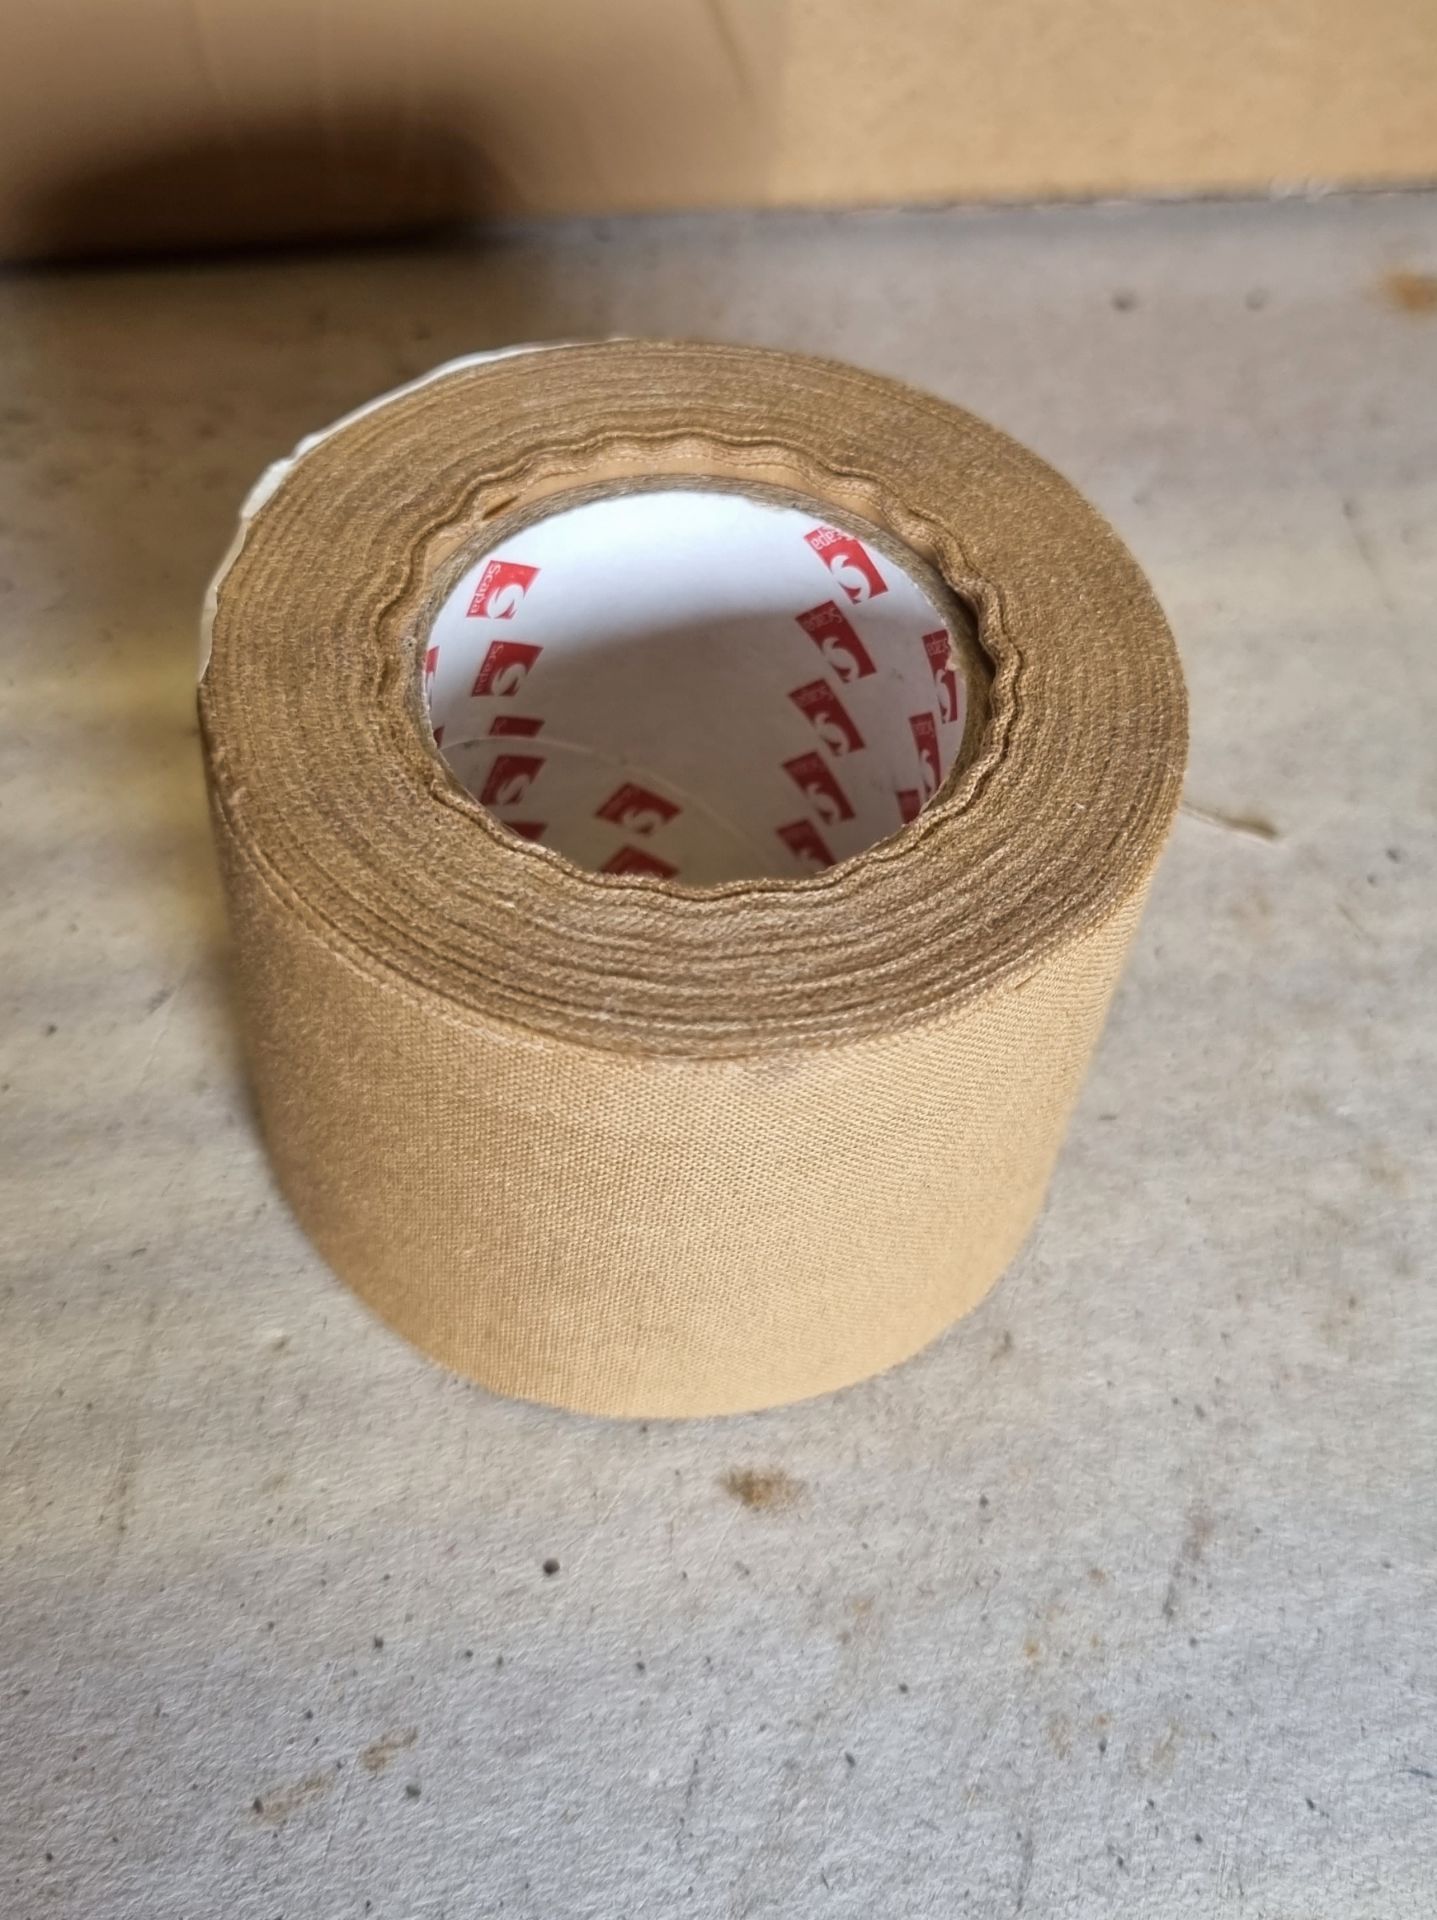 Scapa adhesive tape cloth - biege - 50mm - box of approx 160 rolls - Image 3 of 4